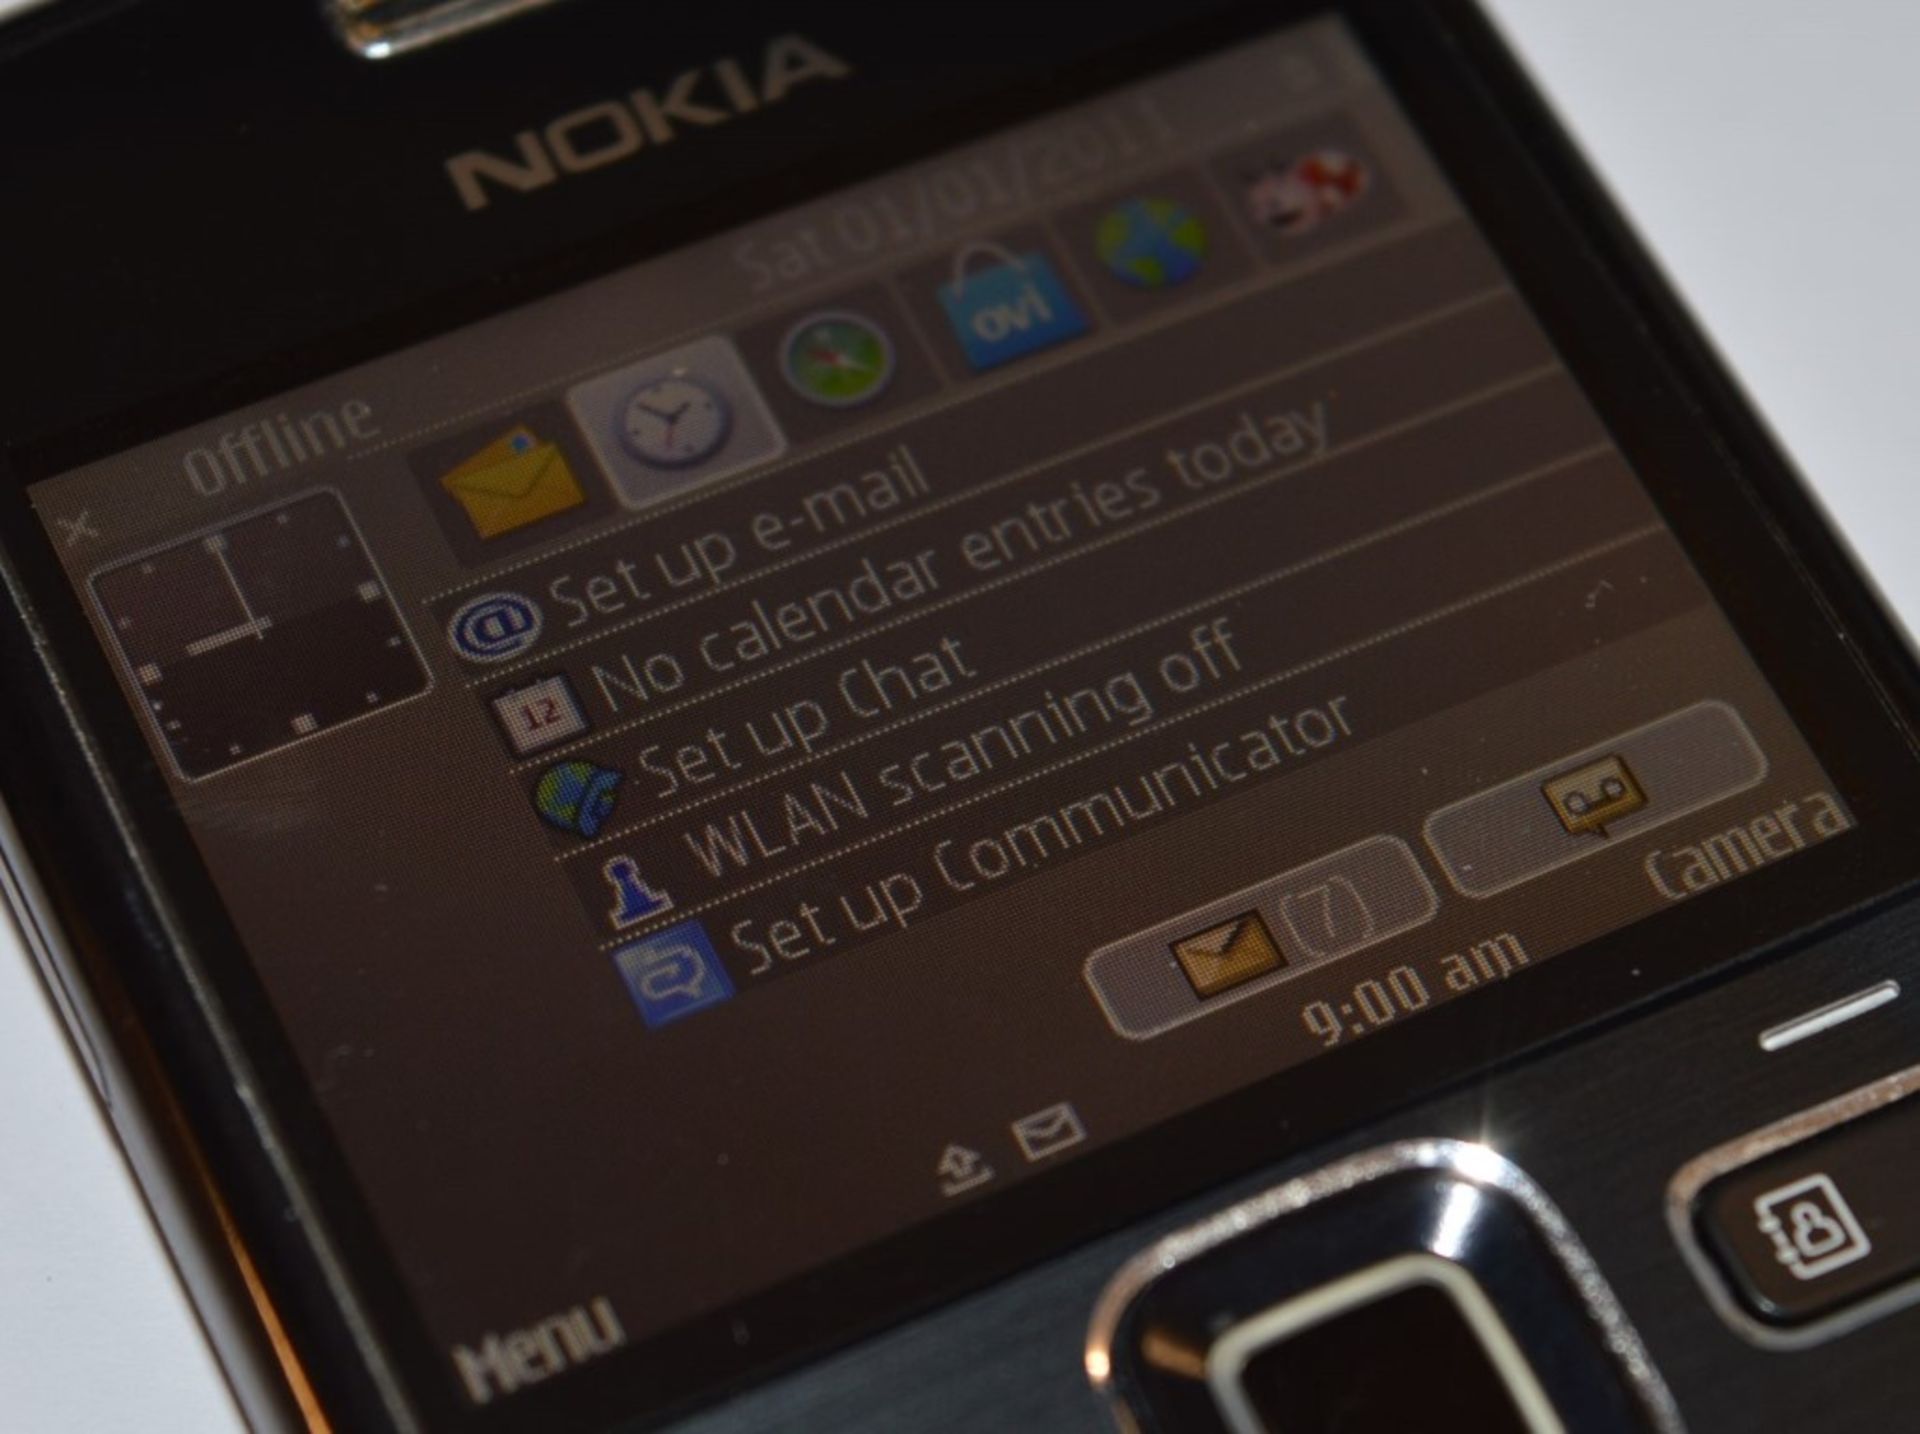 1 x Nokia E72 Mobile Phone Handset With Charger - Features Qwerty Keyboard, 600mhz CPU, 250mb Storag - Image 5 of 6